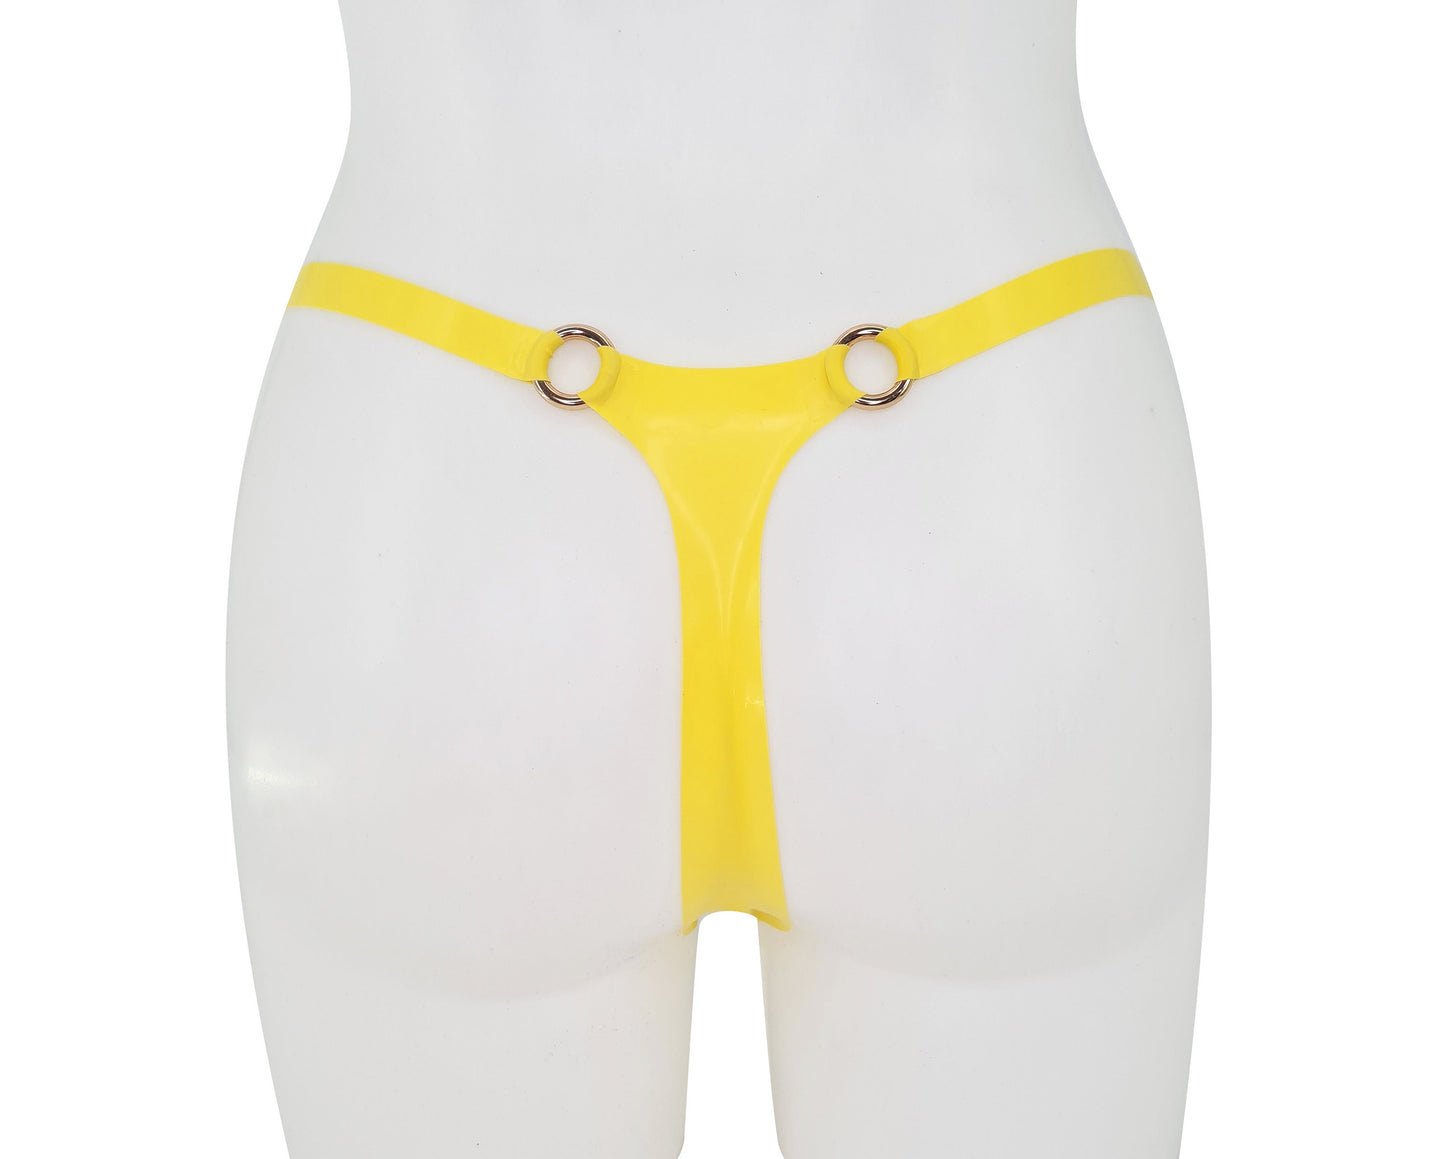 Latex thong with rings (silver, gold or rainbow rings)